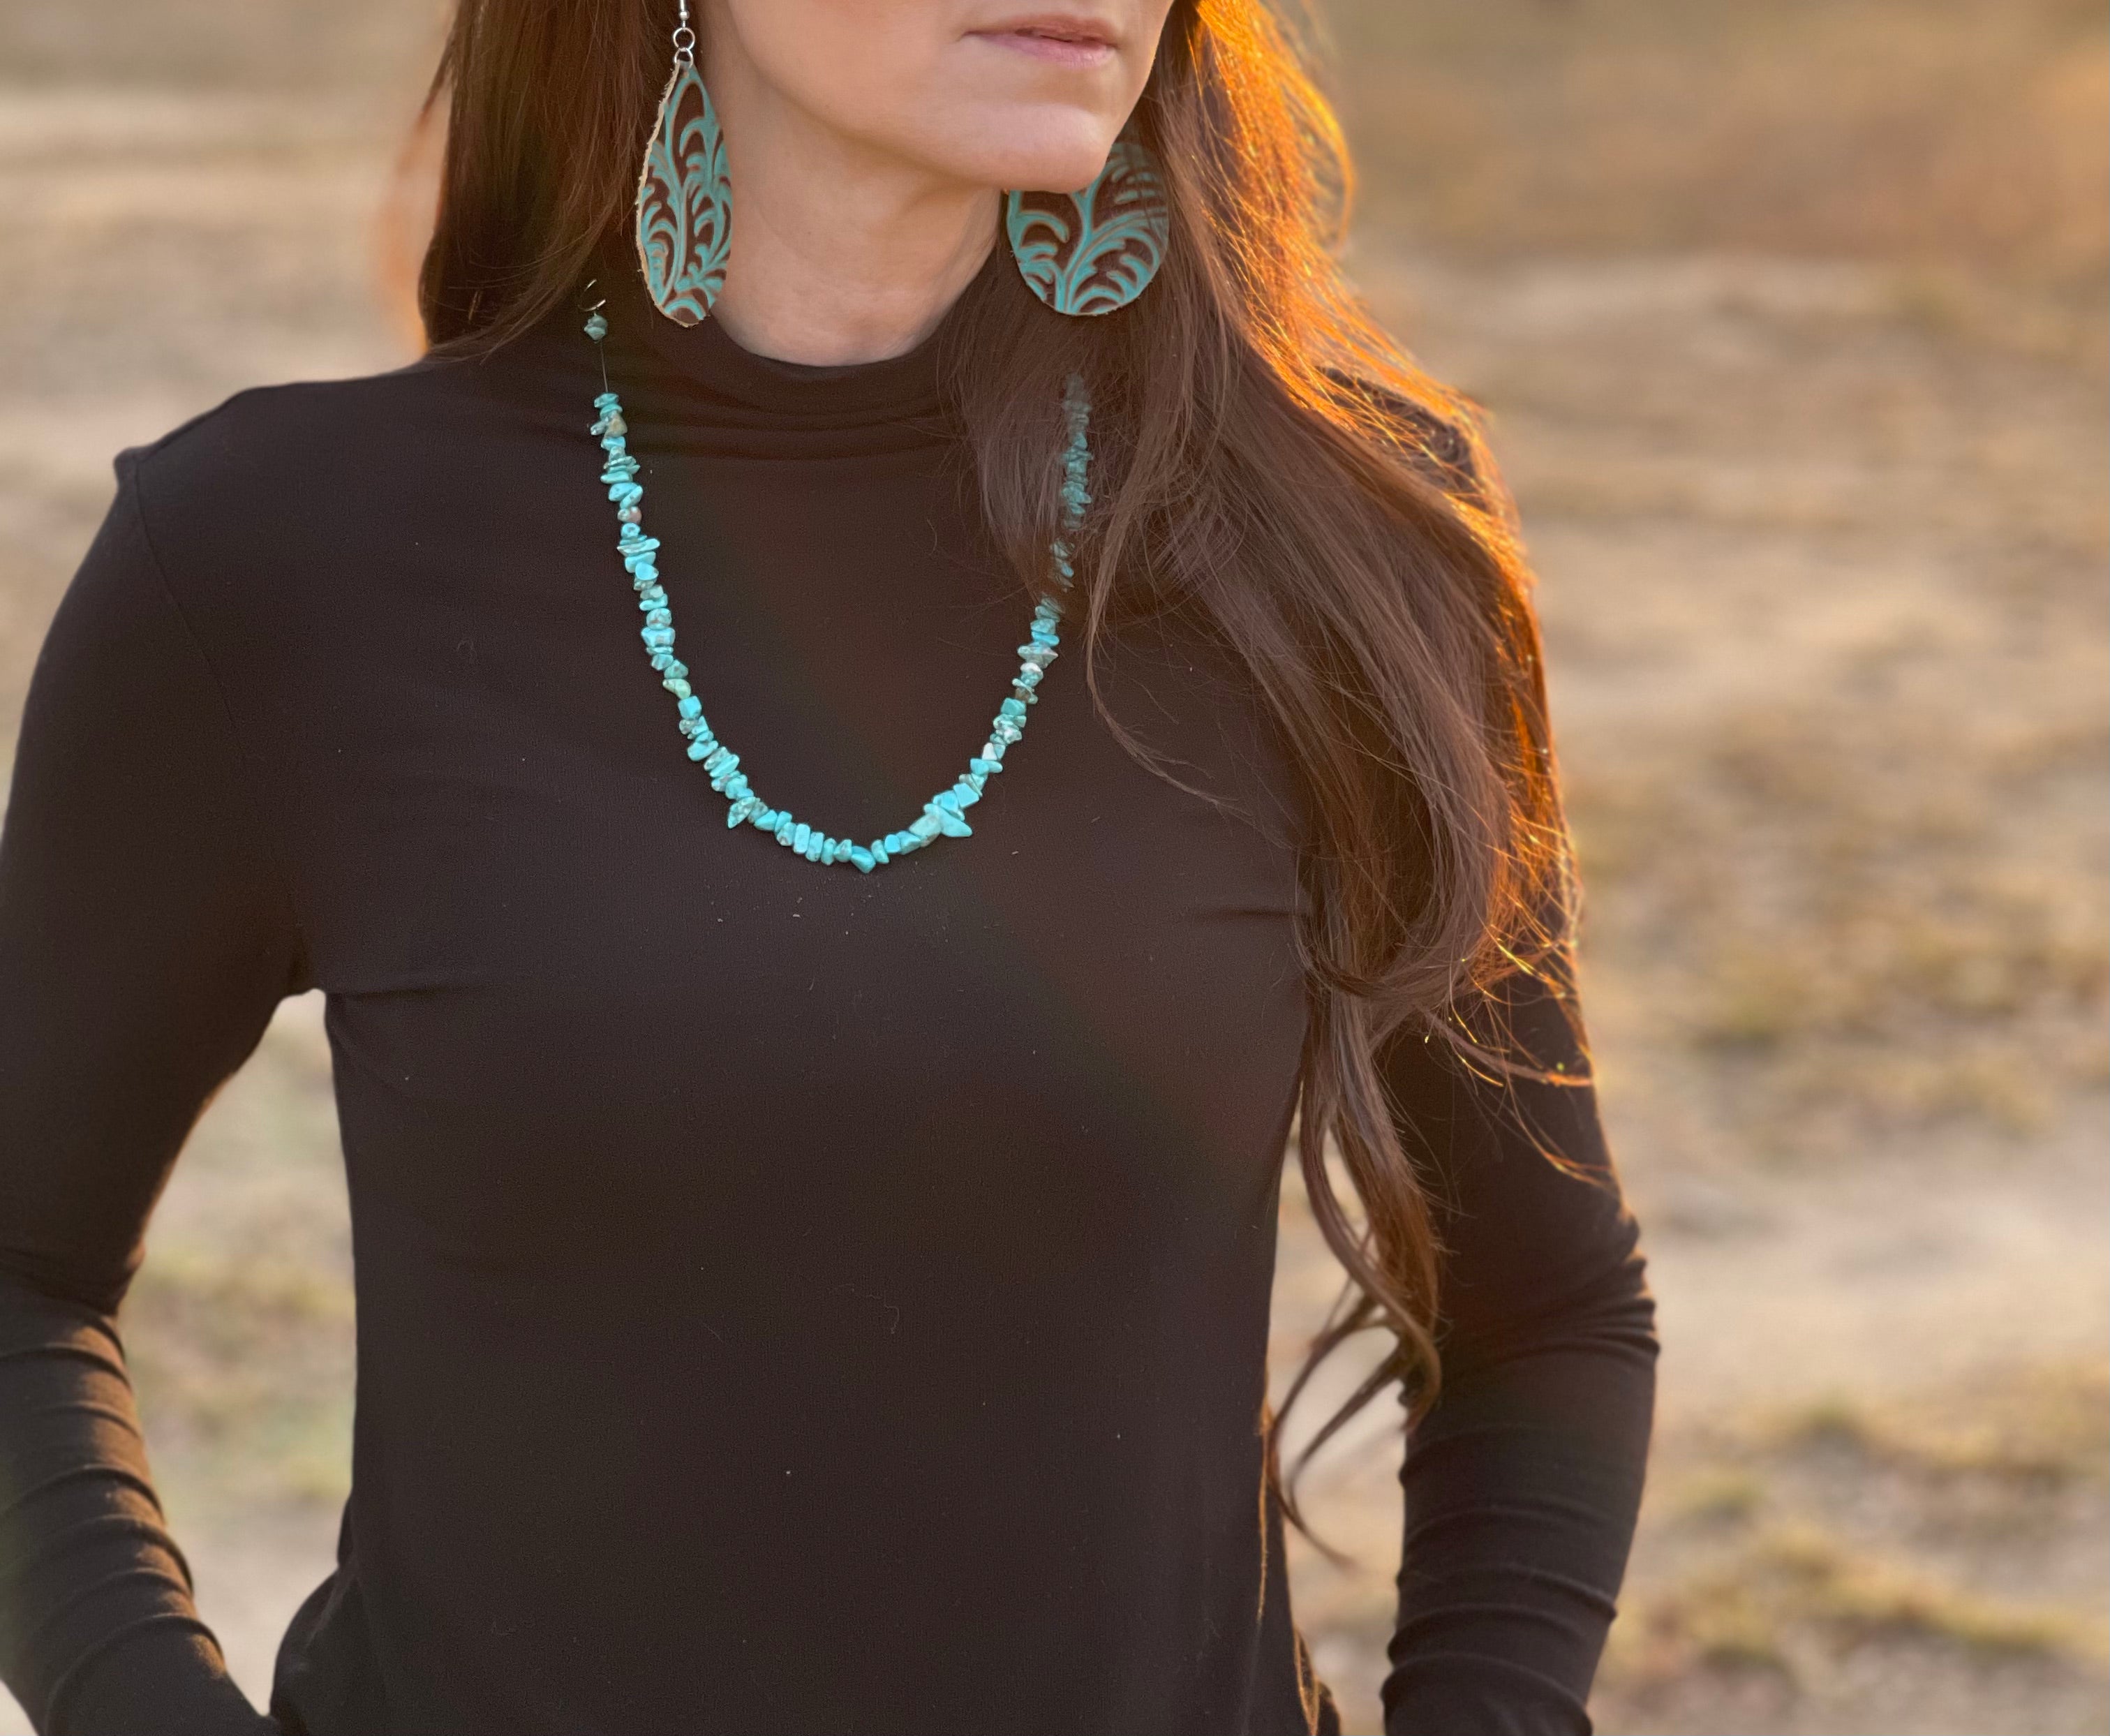 The Nola turquoise necklace